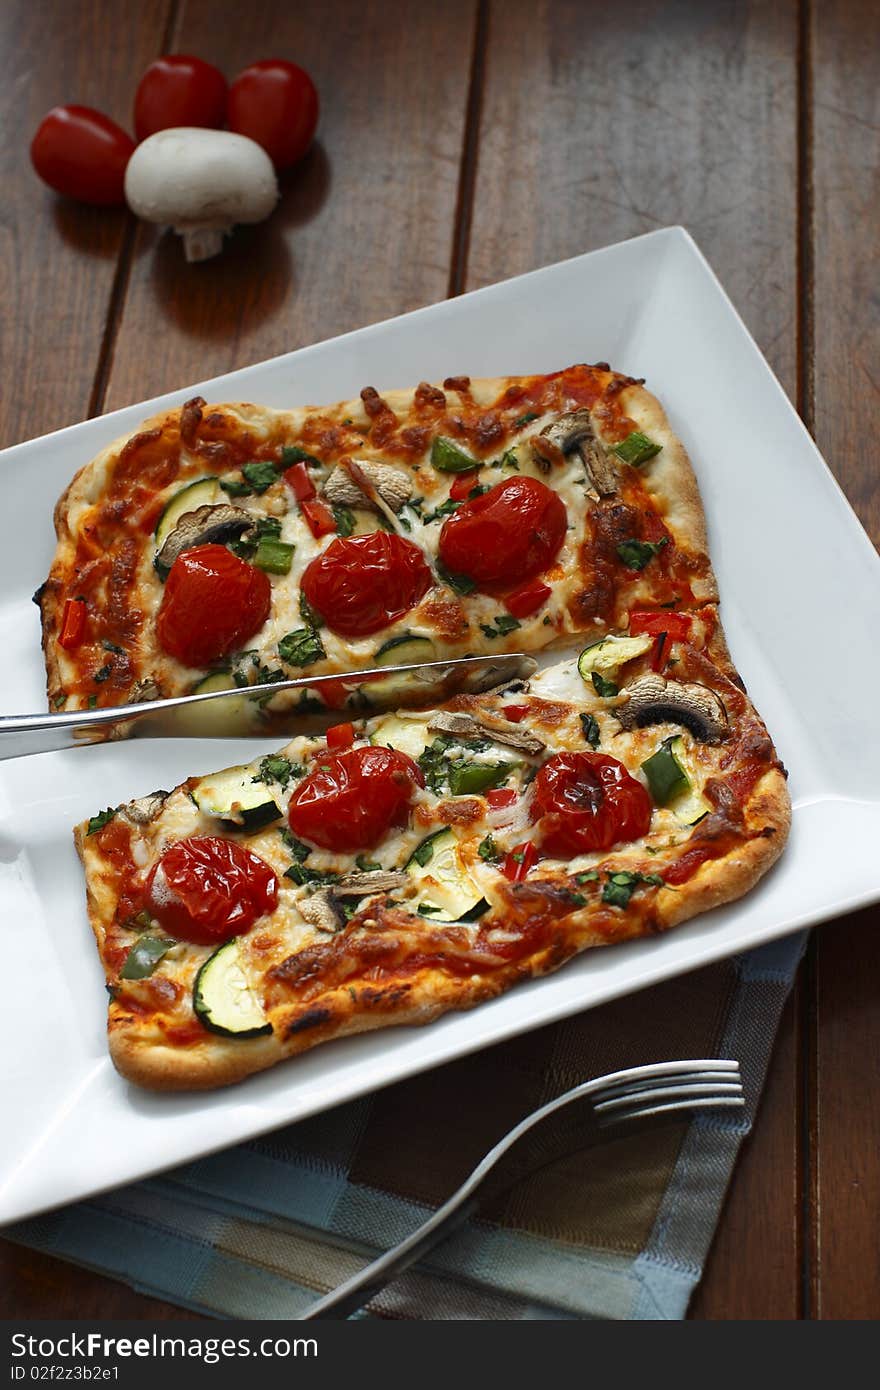 Vegetarian pizza on a white plate with fork and knife utensil. Vegetarian pizza on a white plate with fork and knife utensil.